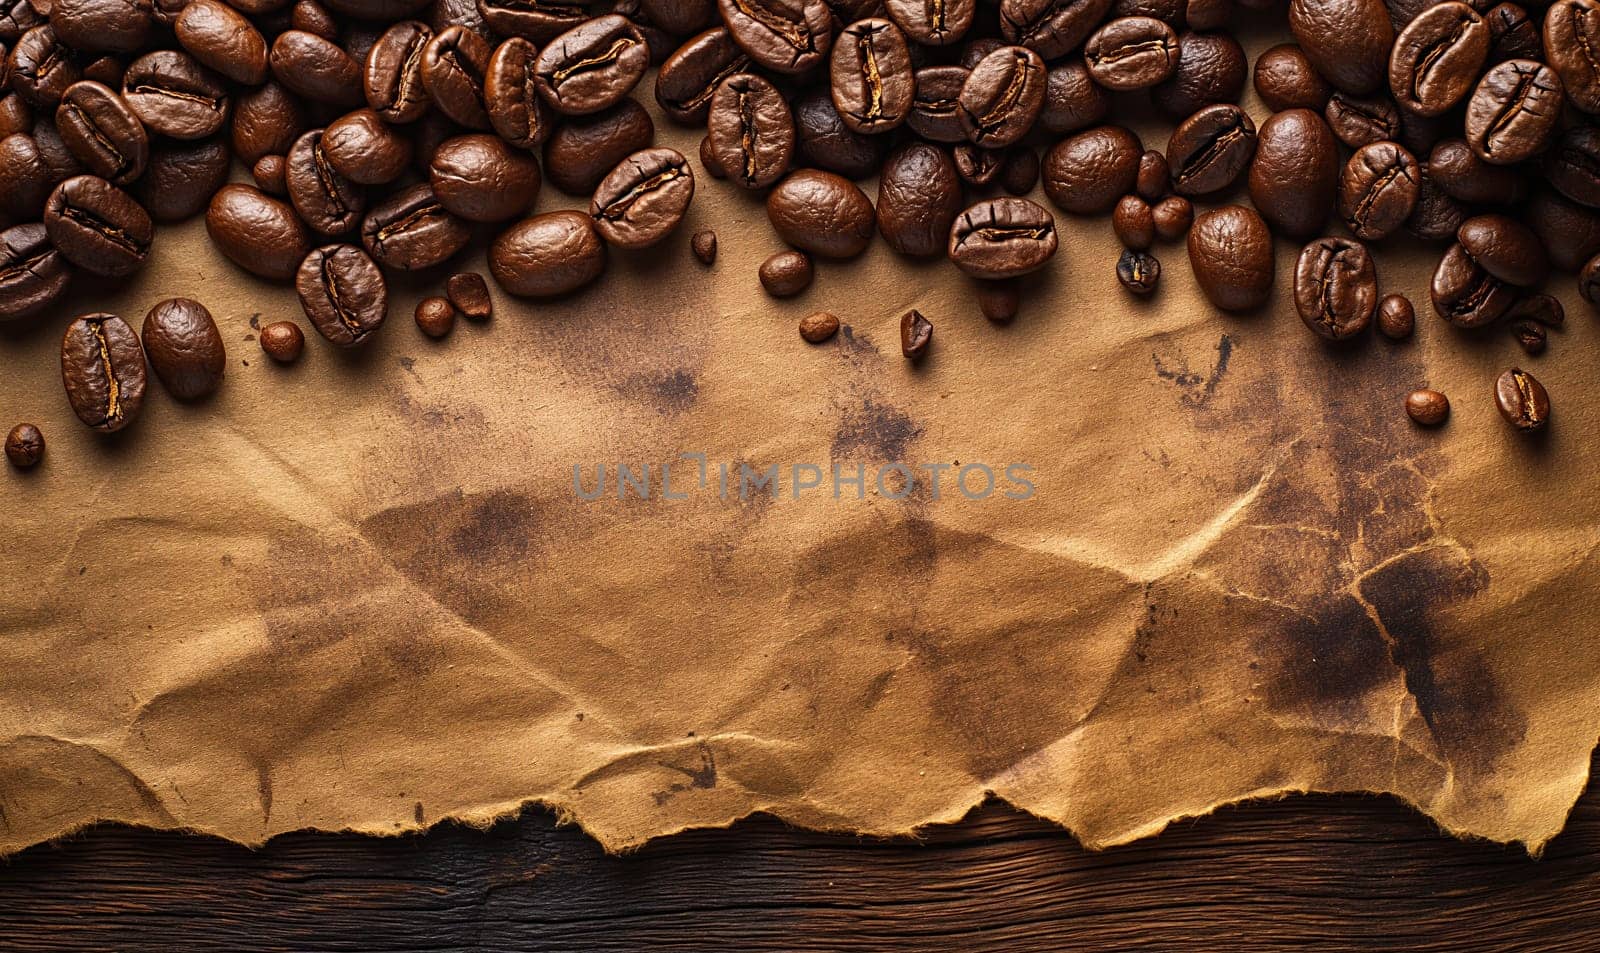 Scattered coffee beans on paper with space for text. by Fischeron